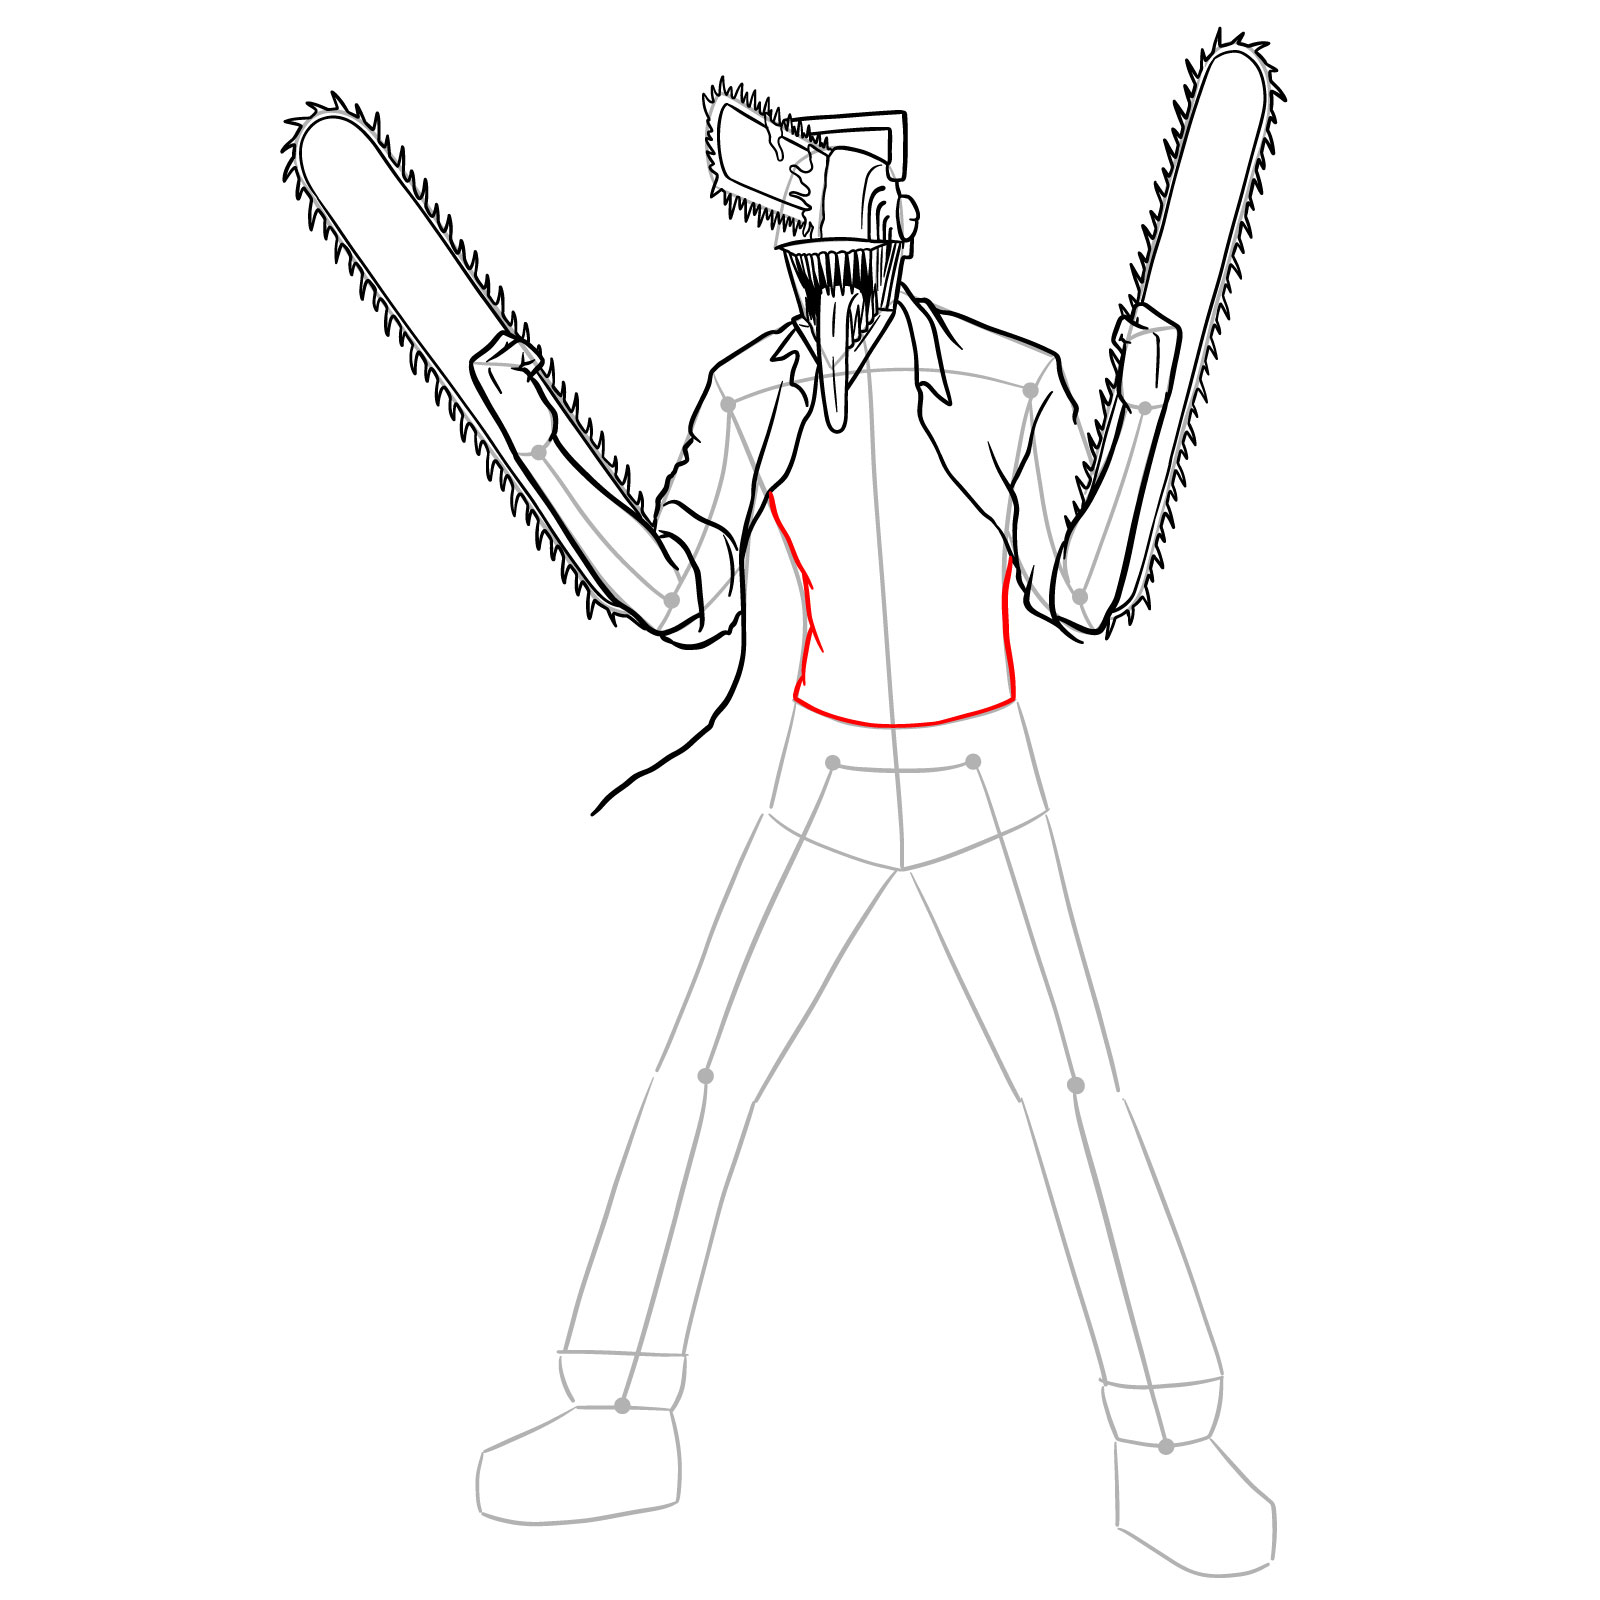 A sketch of Chainsaw Man's torso with the outline extending down to the pants - step 21